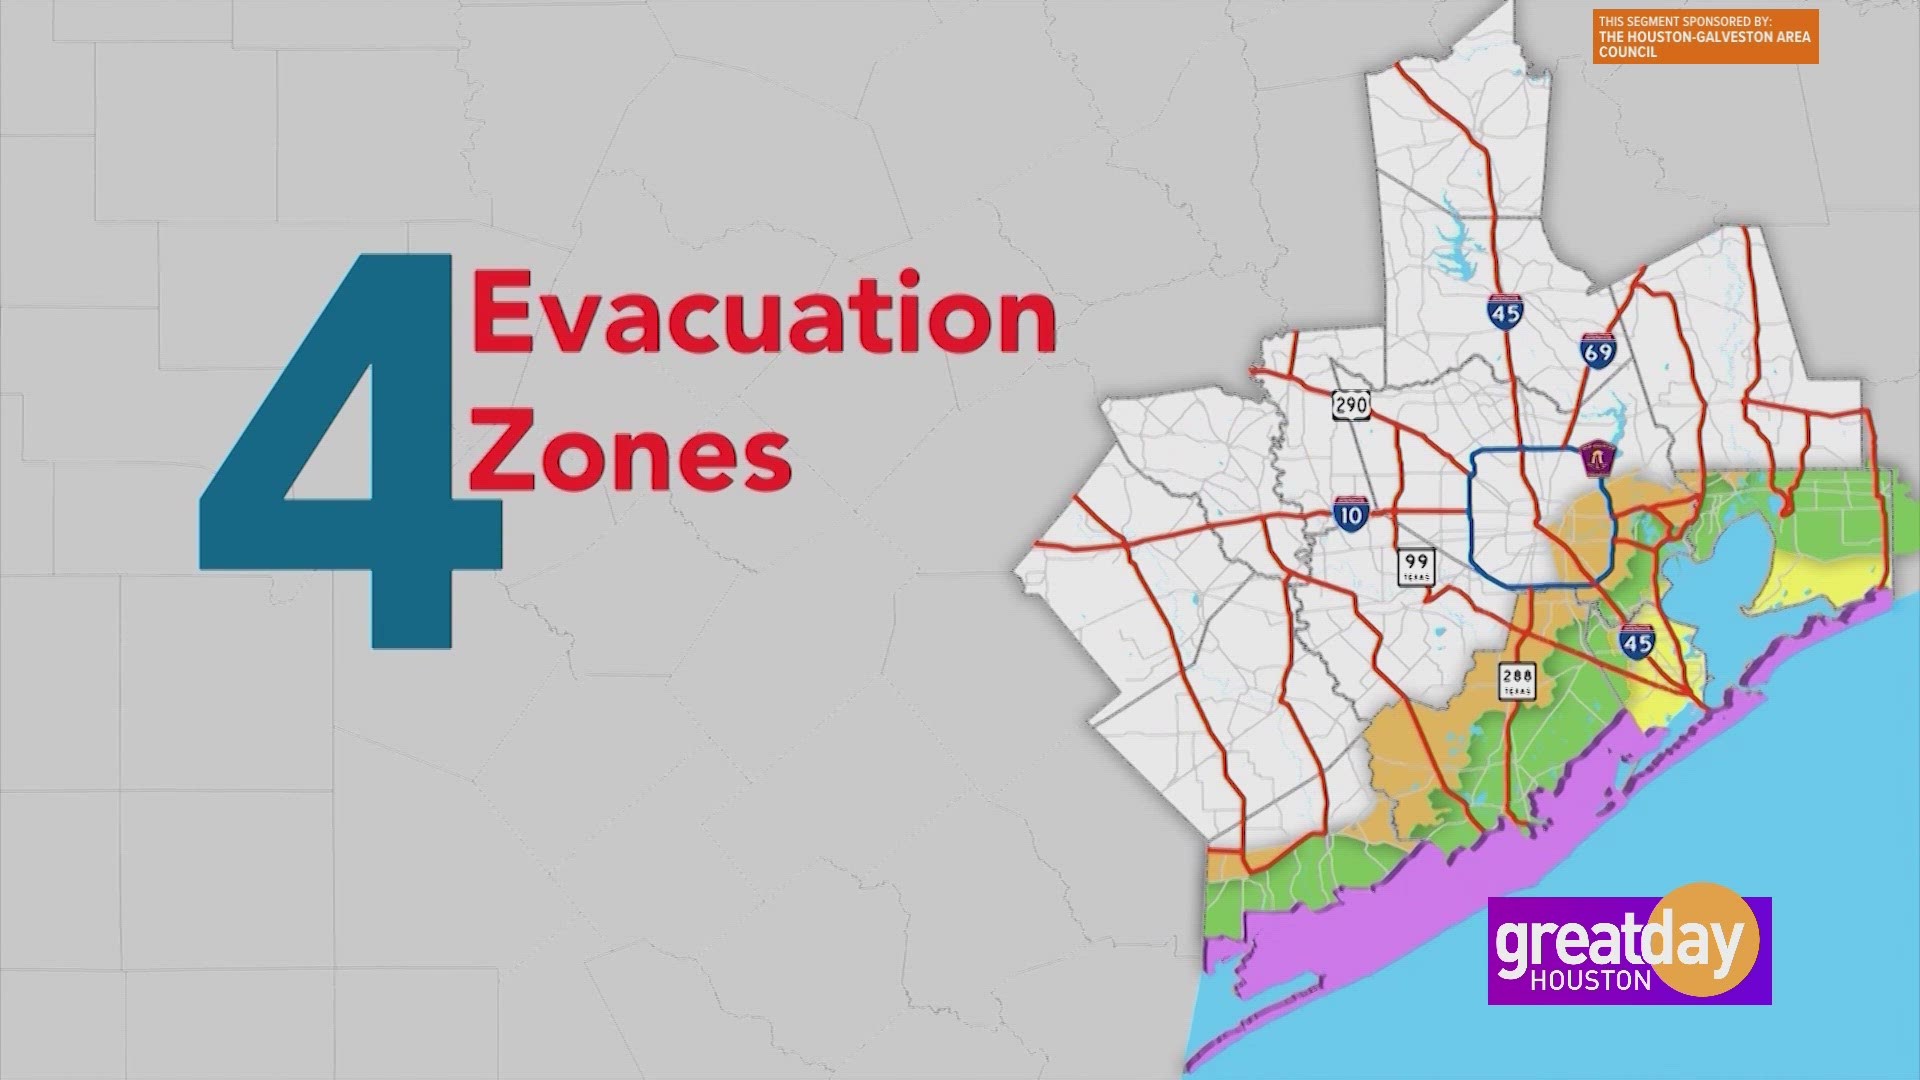 Ashley Seals with The Houston-Galveston Area Council explains how evacuation routes are equipped with resources to ensure safety and a quick exit.